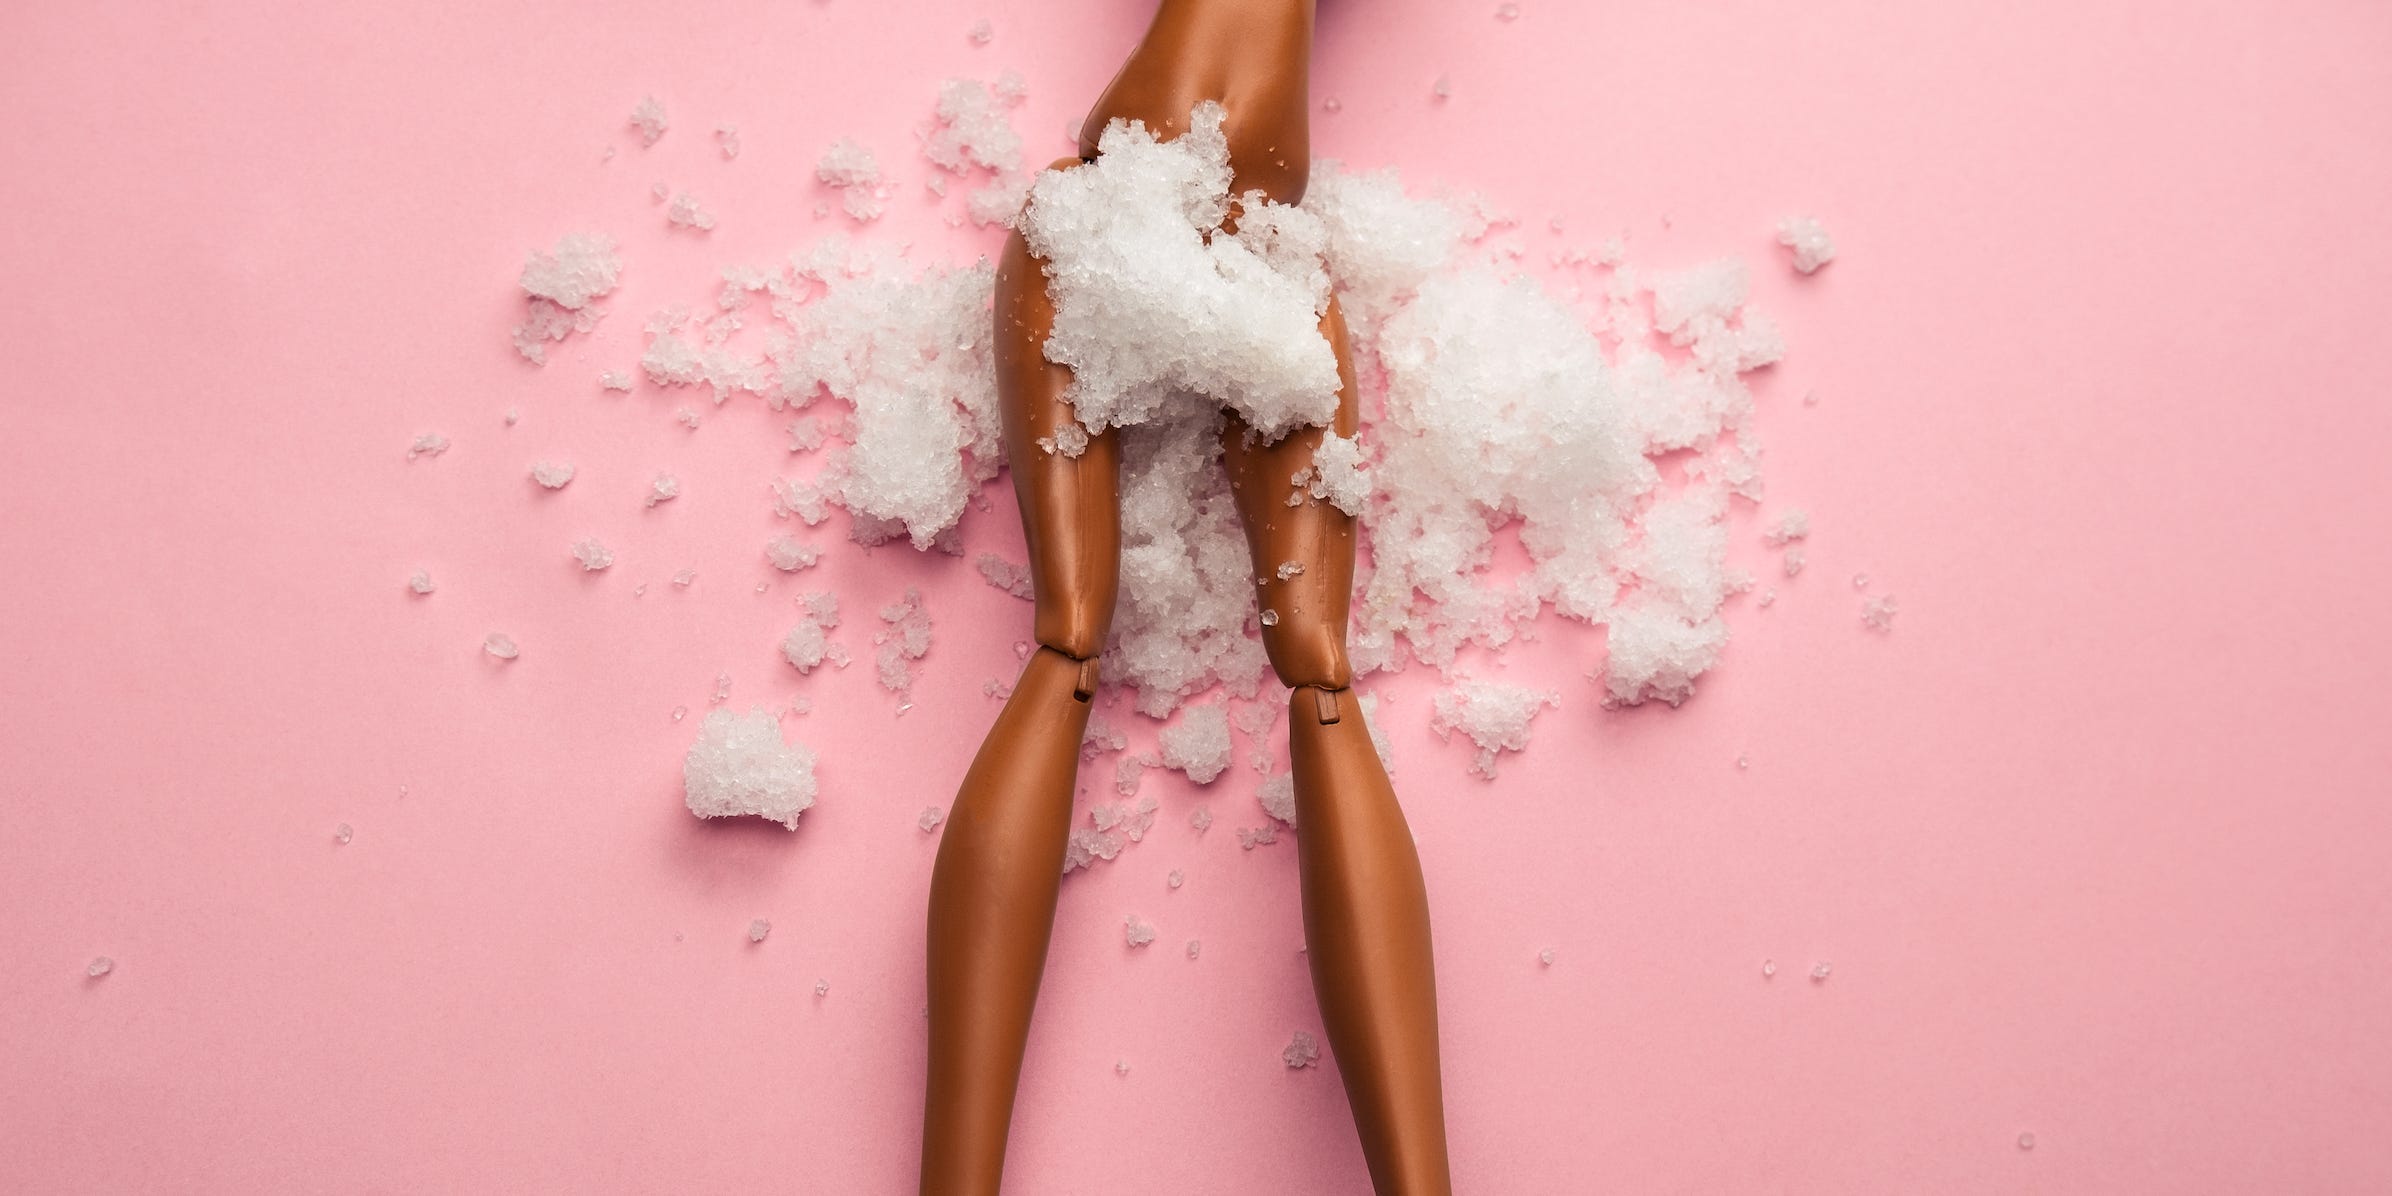 A doll on a pink background, seen from the waist down, has snow covering its hips.